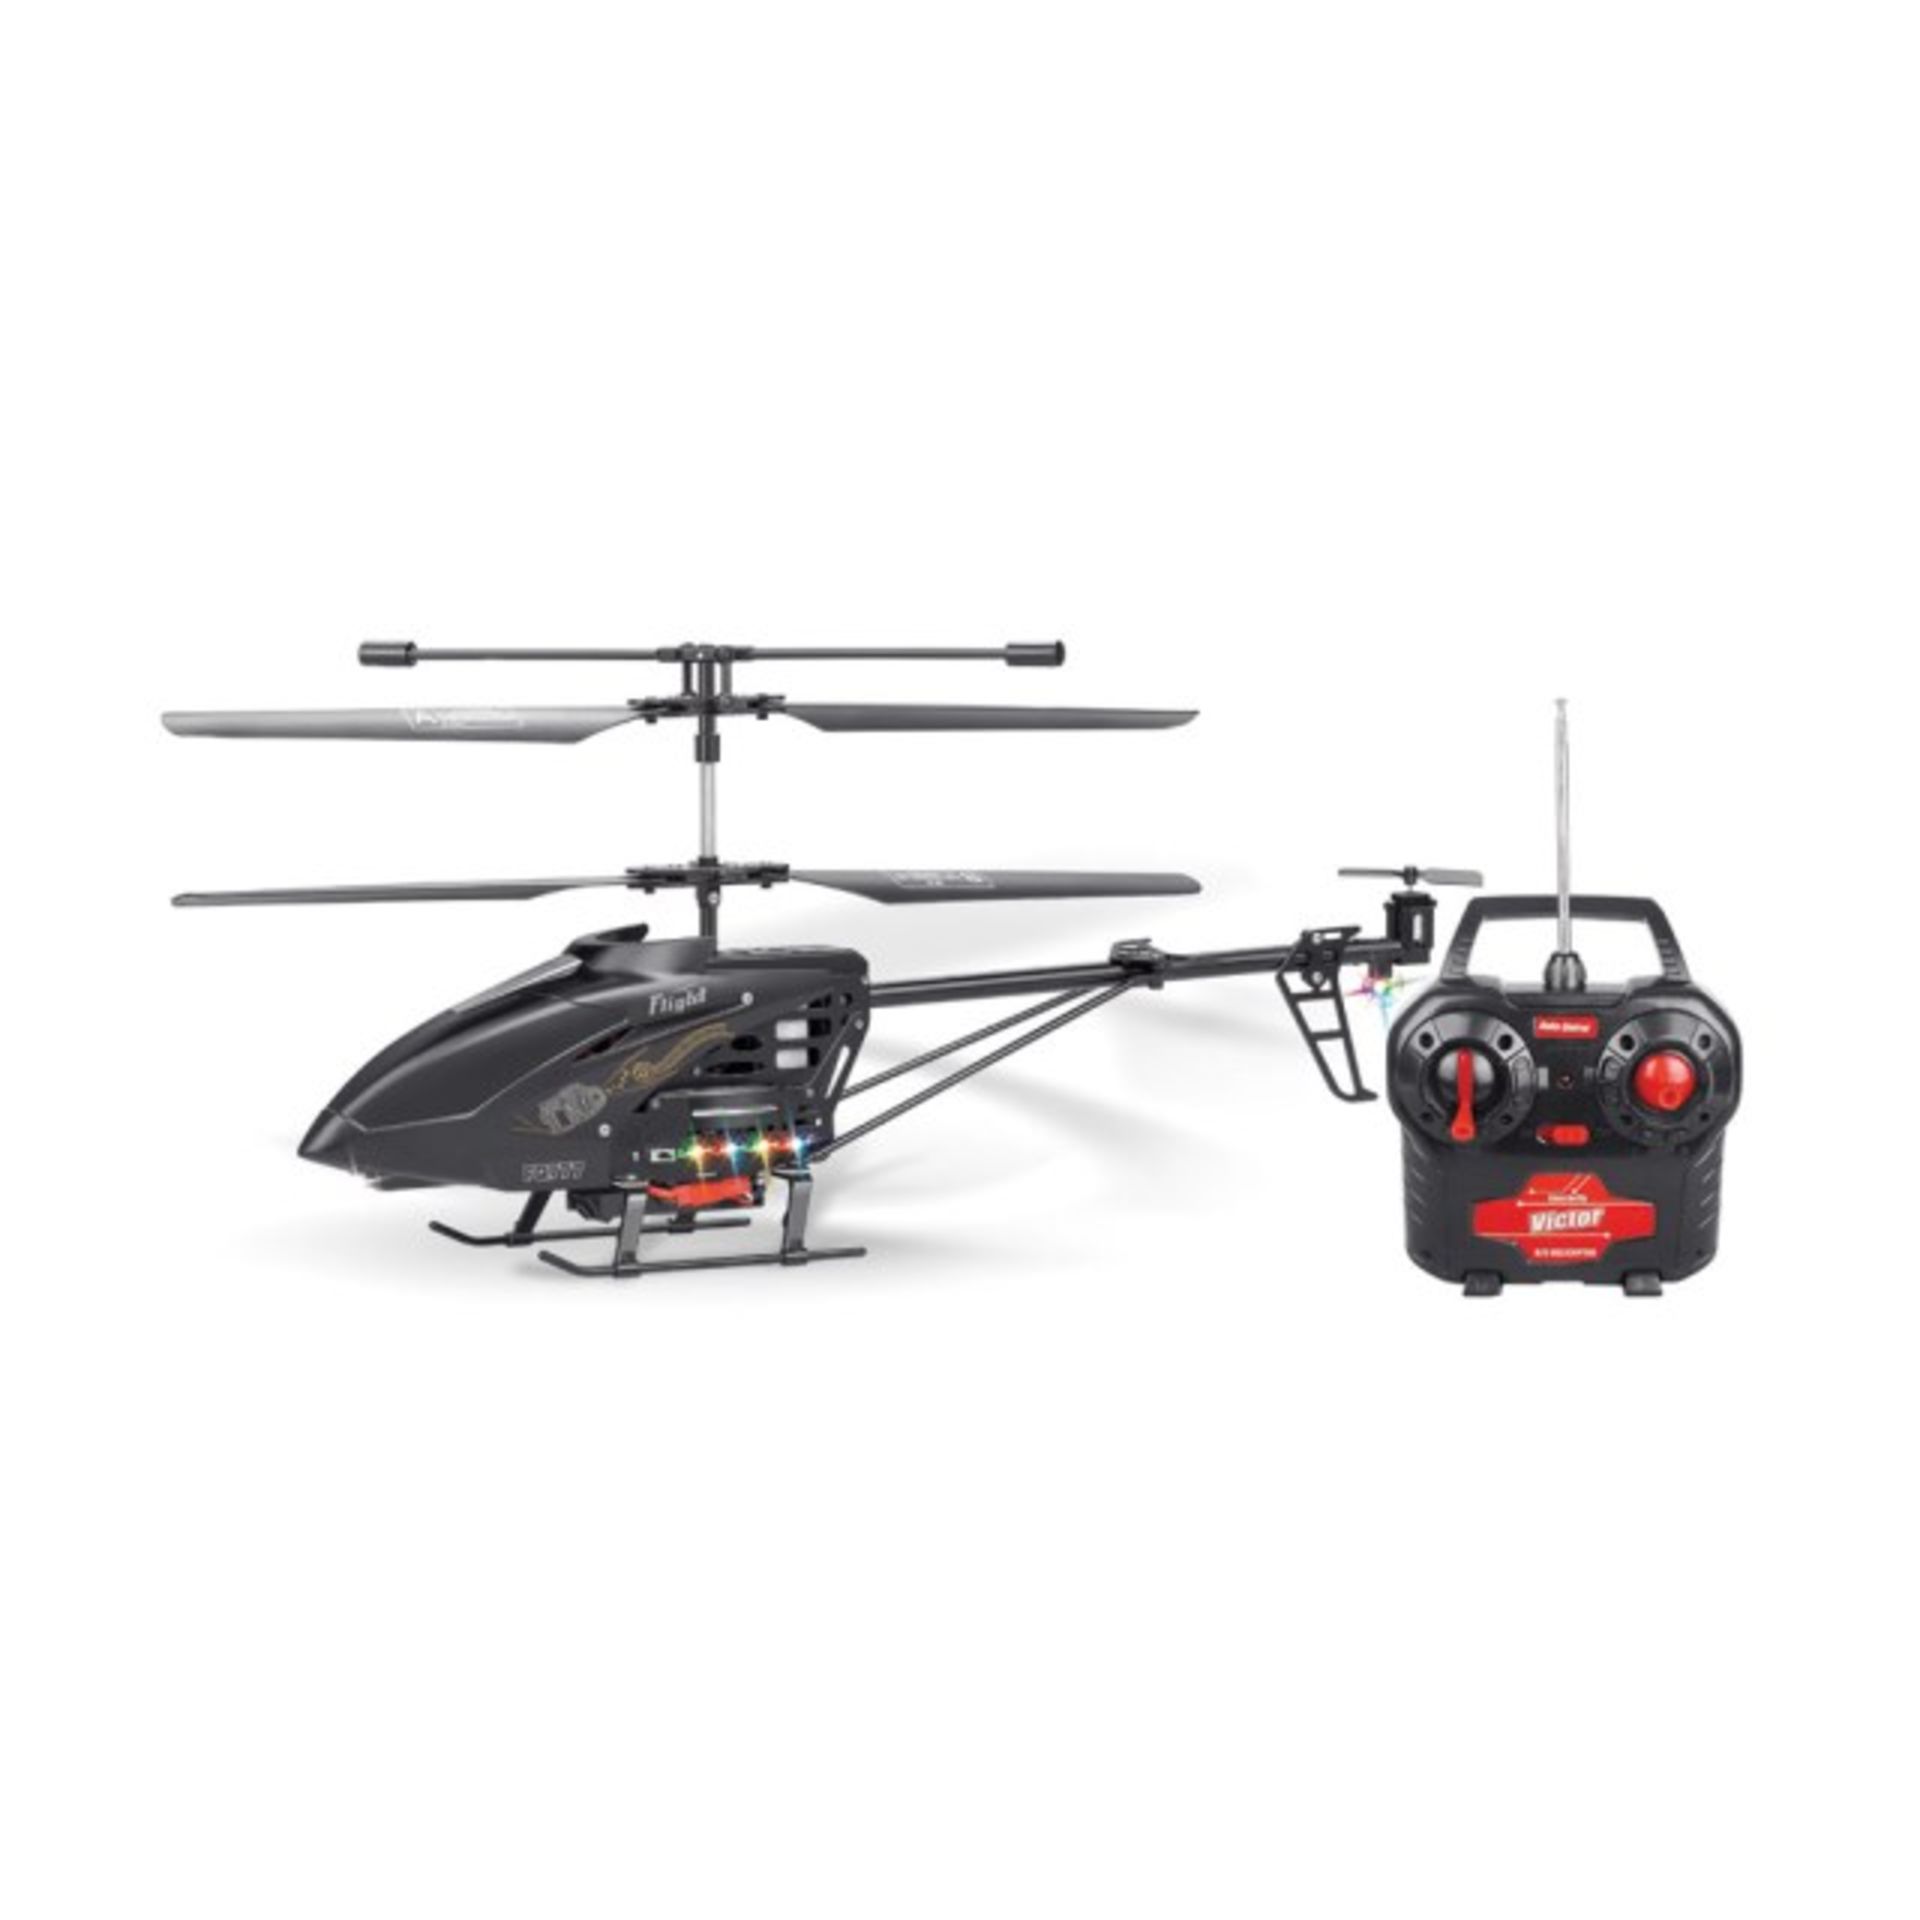 V Shadow Hawk Spy Helicopter With Built In Micro Photo & Video Camera, Lights,Includes SD Card To